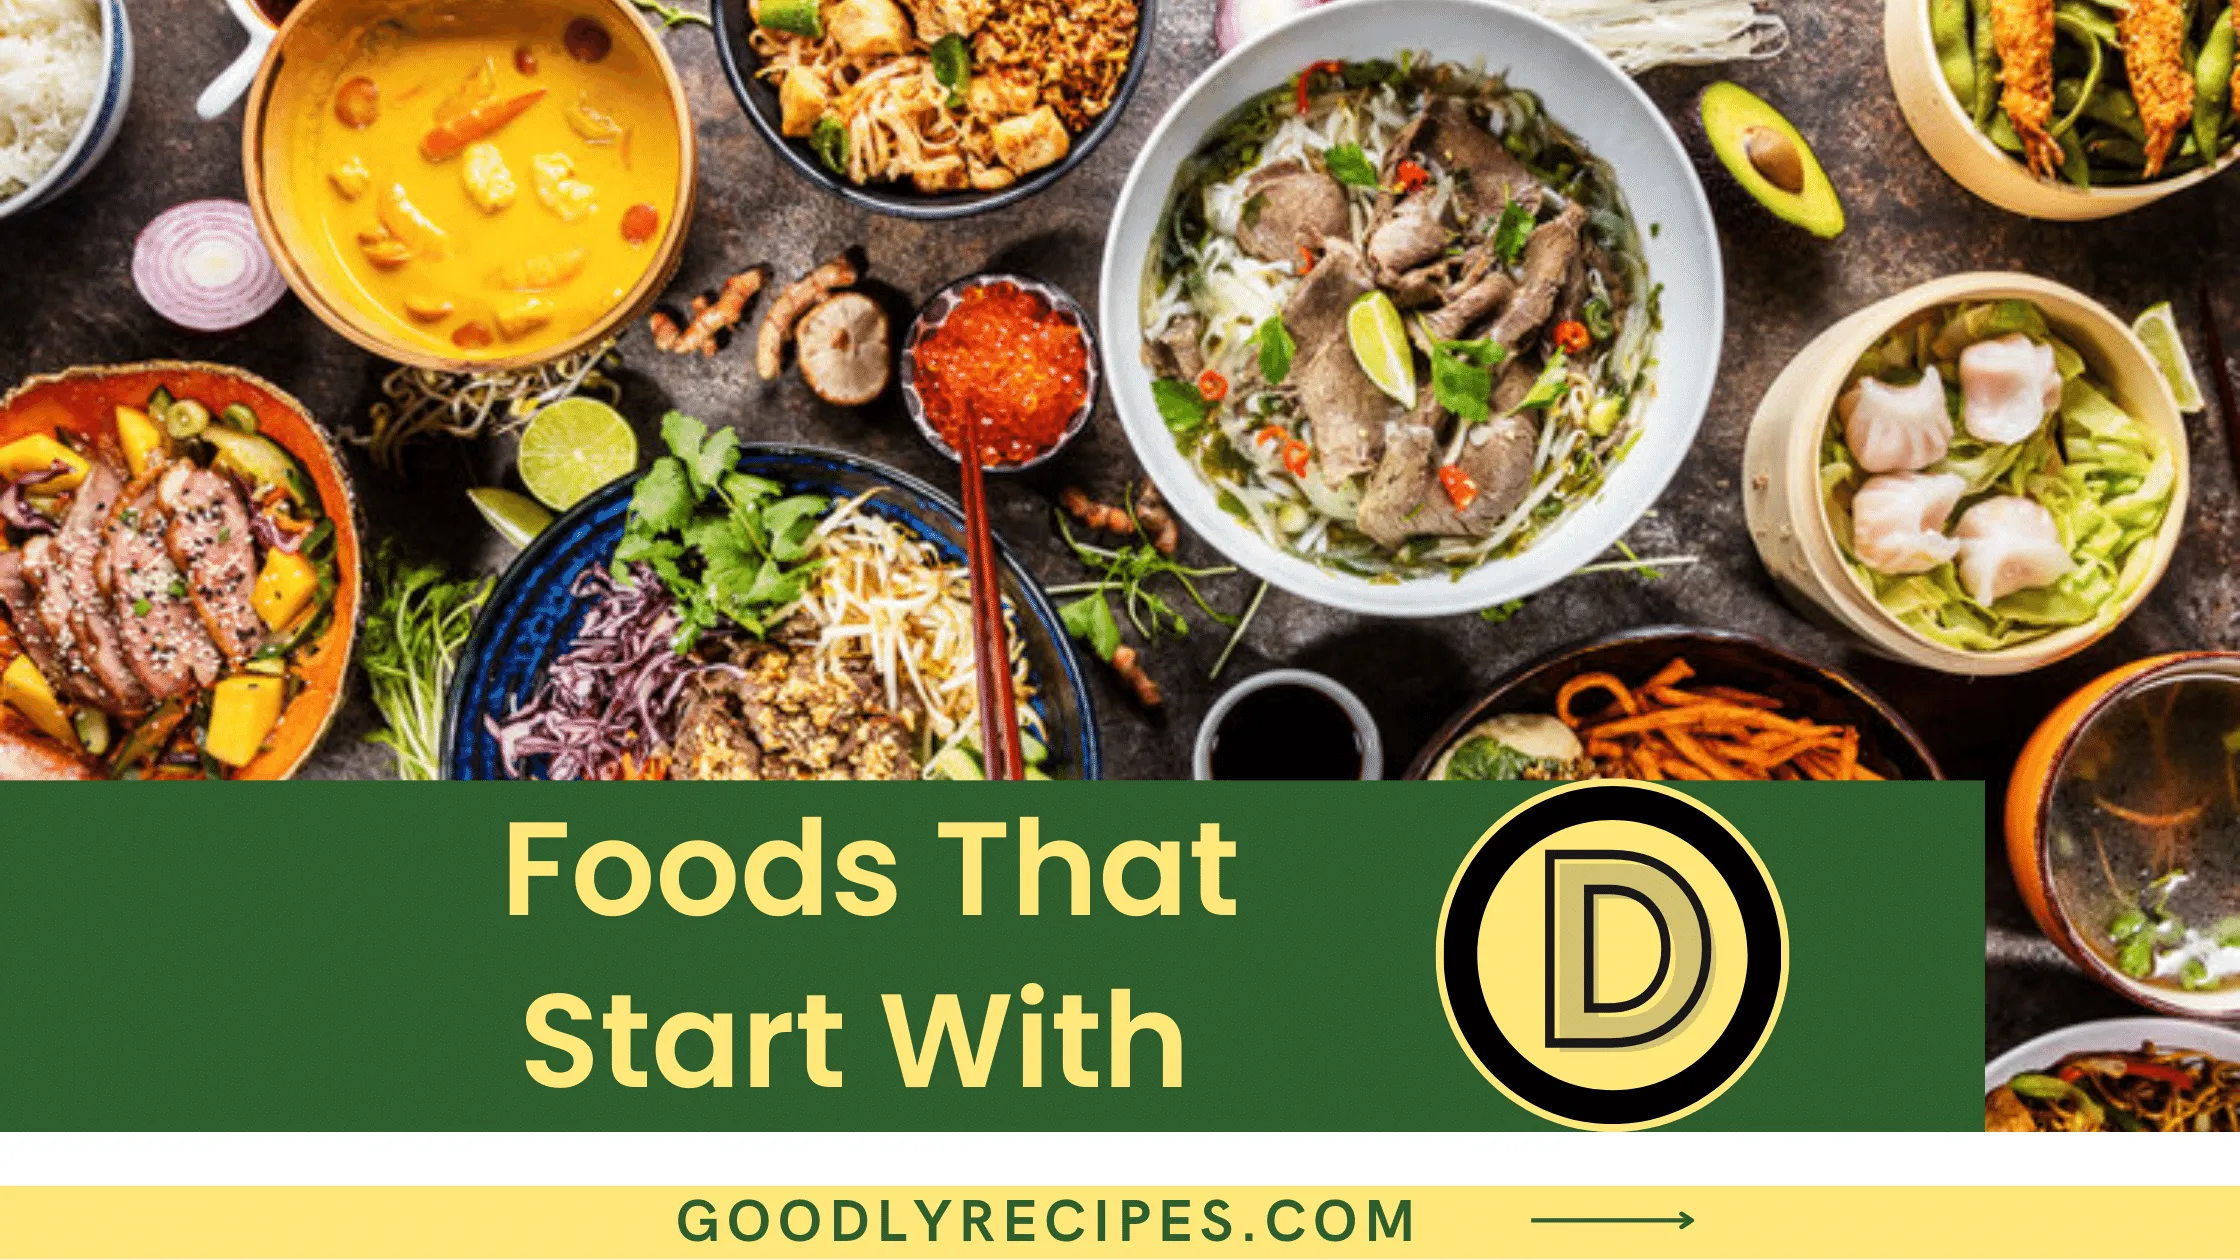 Foods That Start With D - Special Dishes